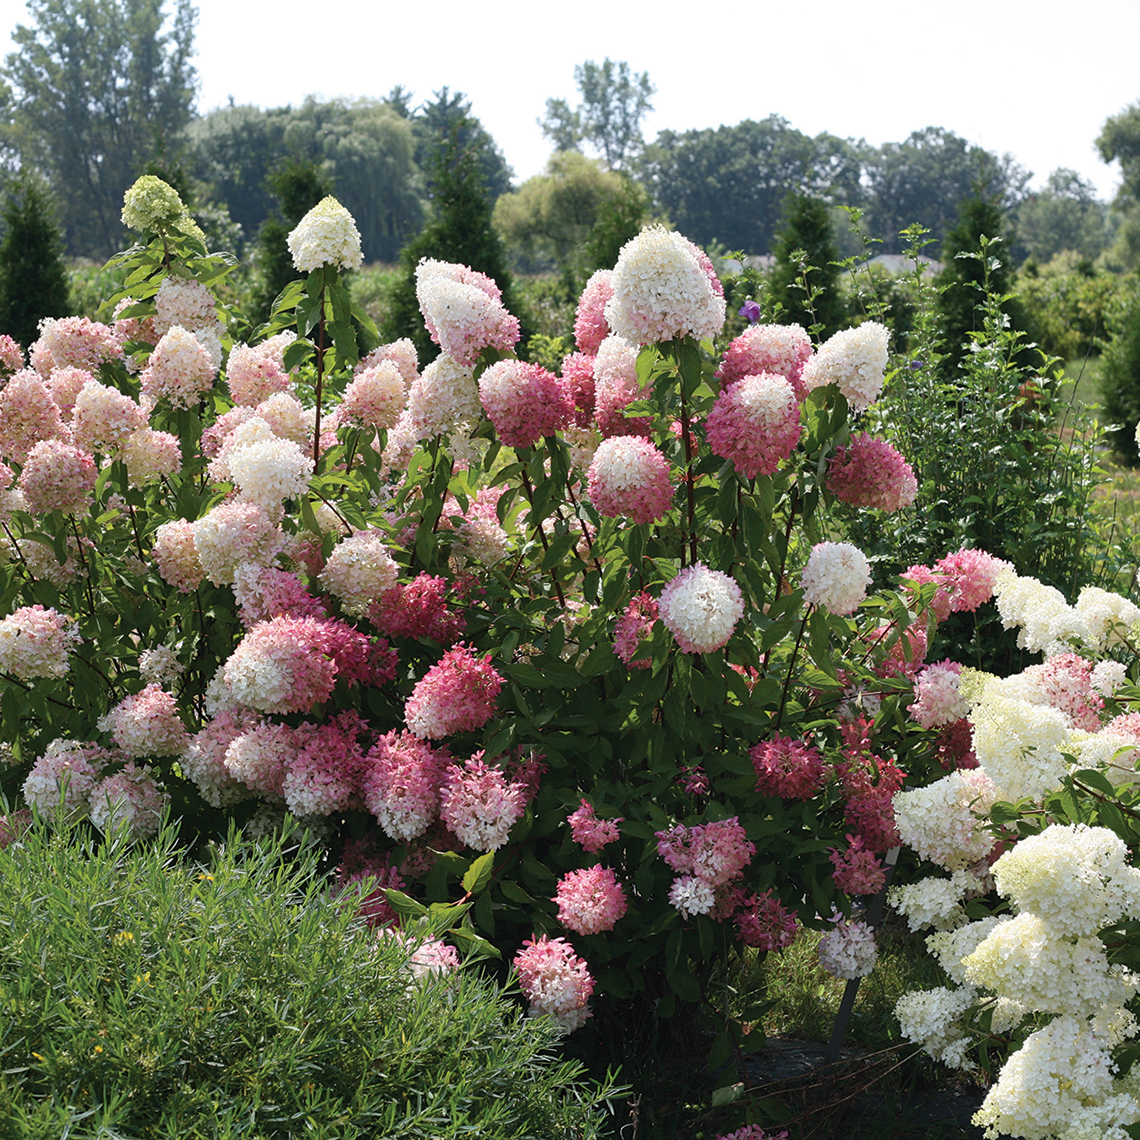 A large specimen of Zinfin Doll hydrangea blooming in a landscape